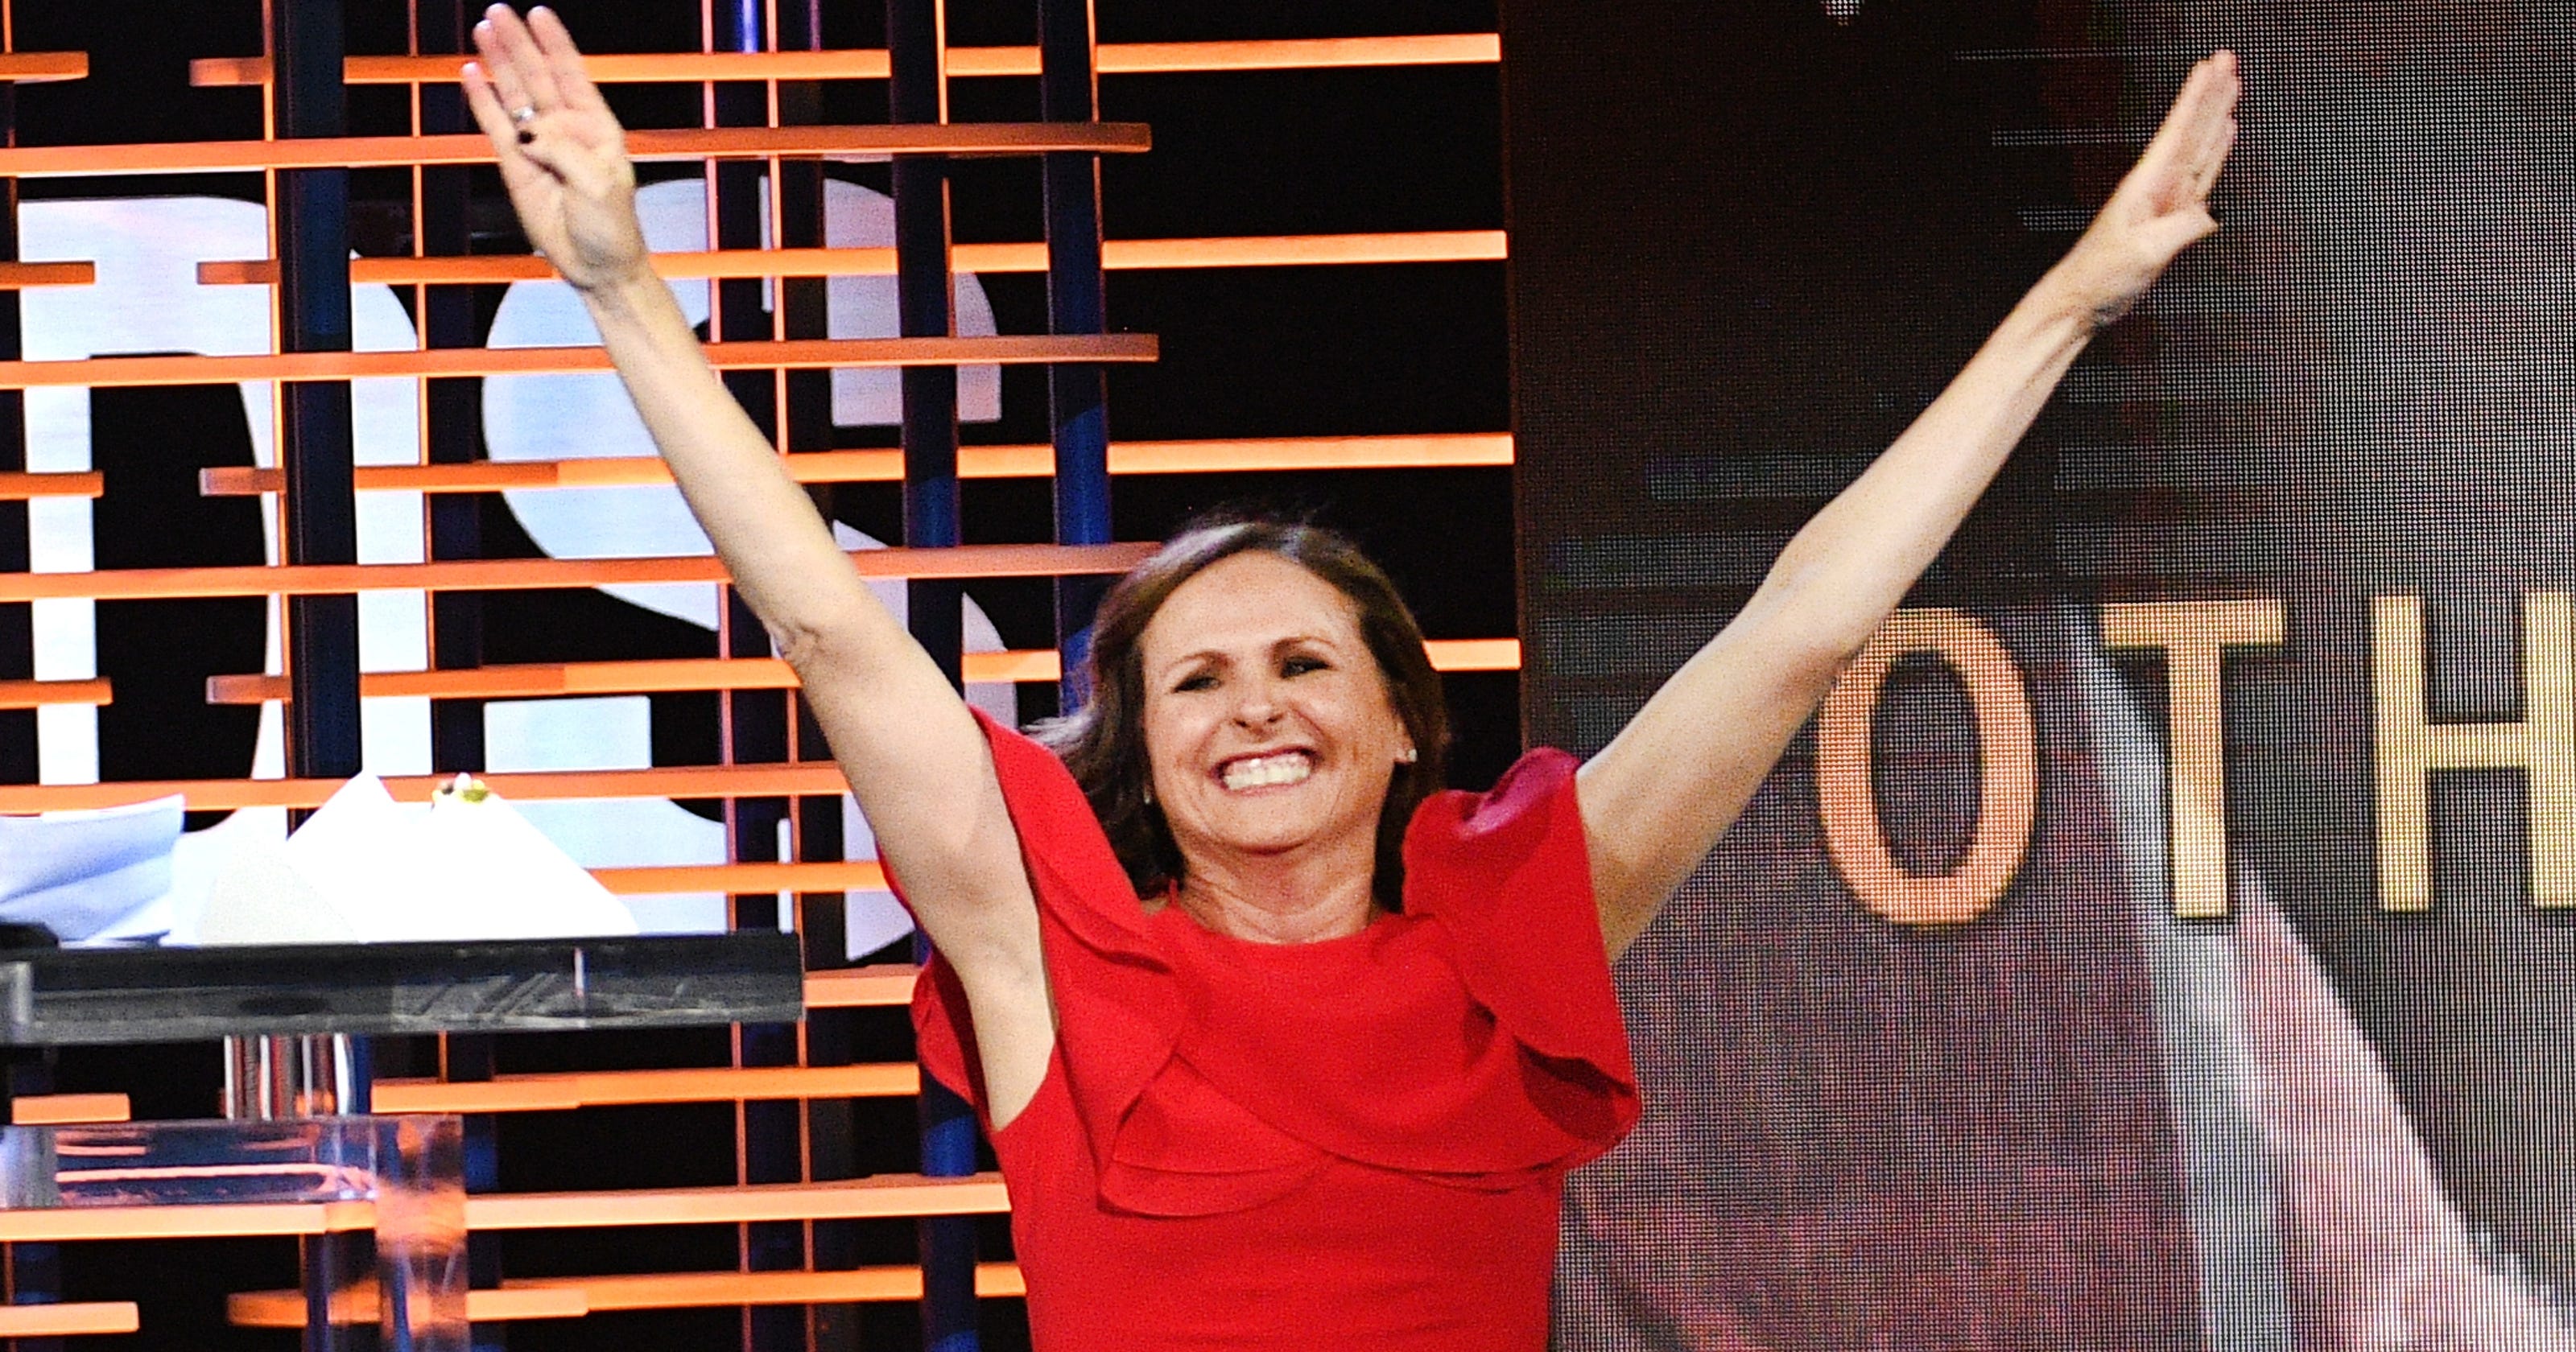 Superstar Molly Shannon Accepts Spirit Award With Signature Move